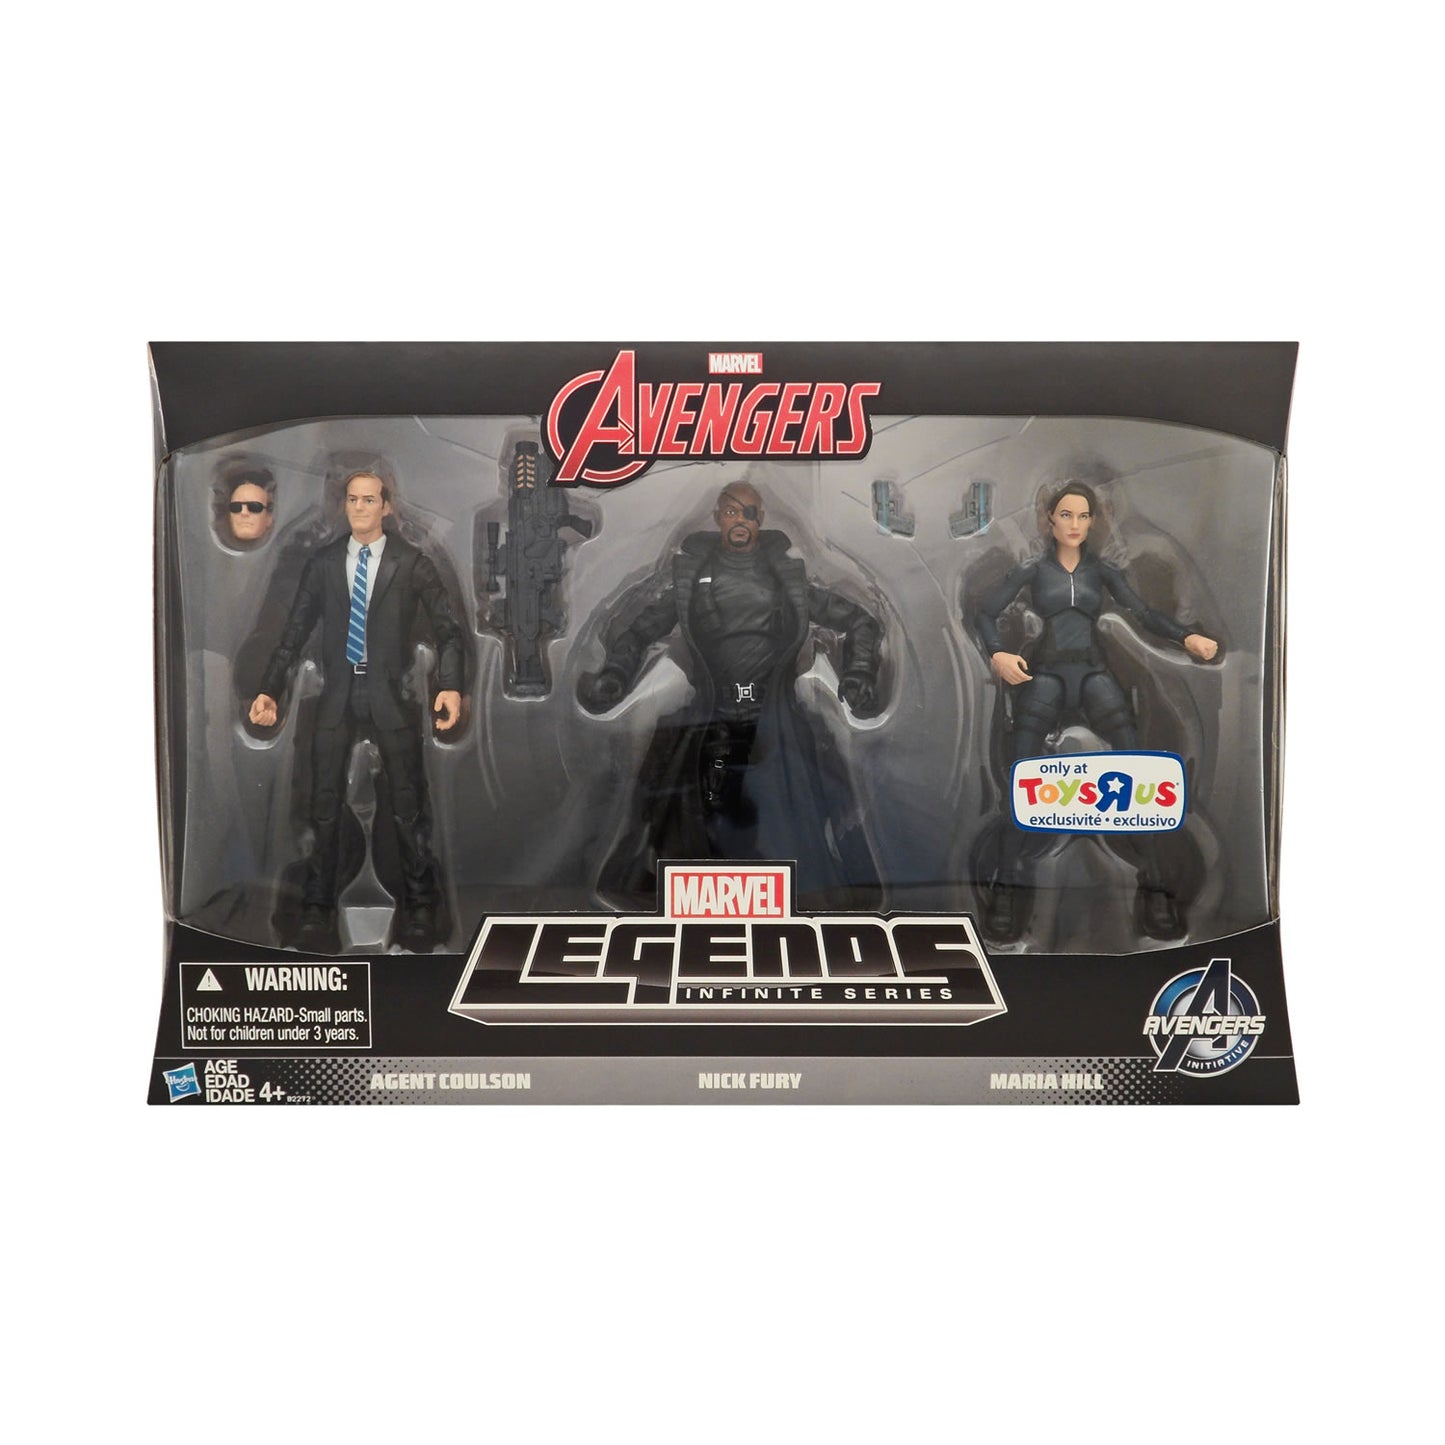 Marvel Legends Toys "R" Us Exclusive S.H.I.E.L.D. 3-Pack (Agent Coulson, Nick Fury, Maria Hill)